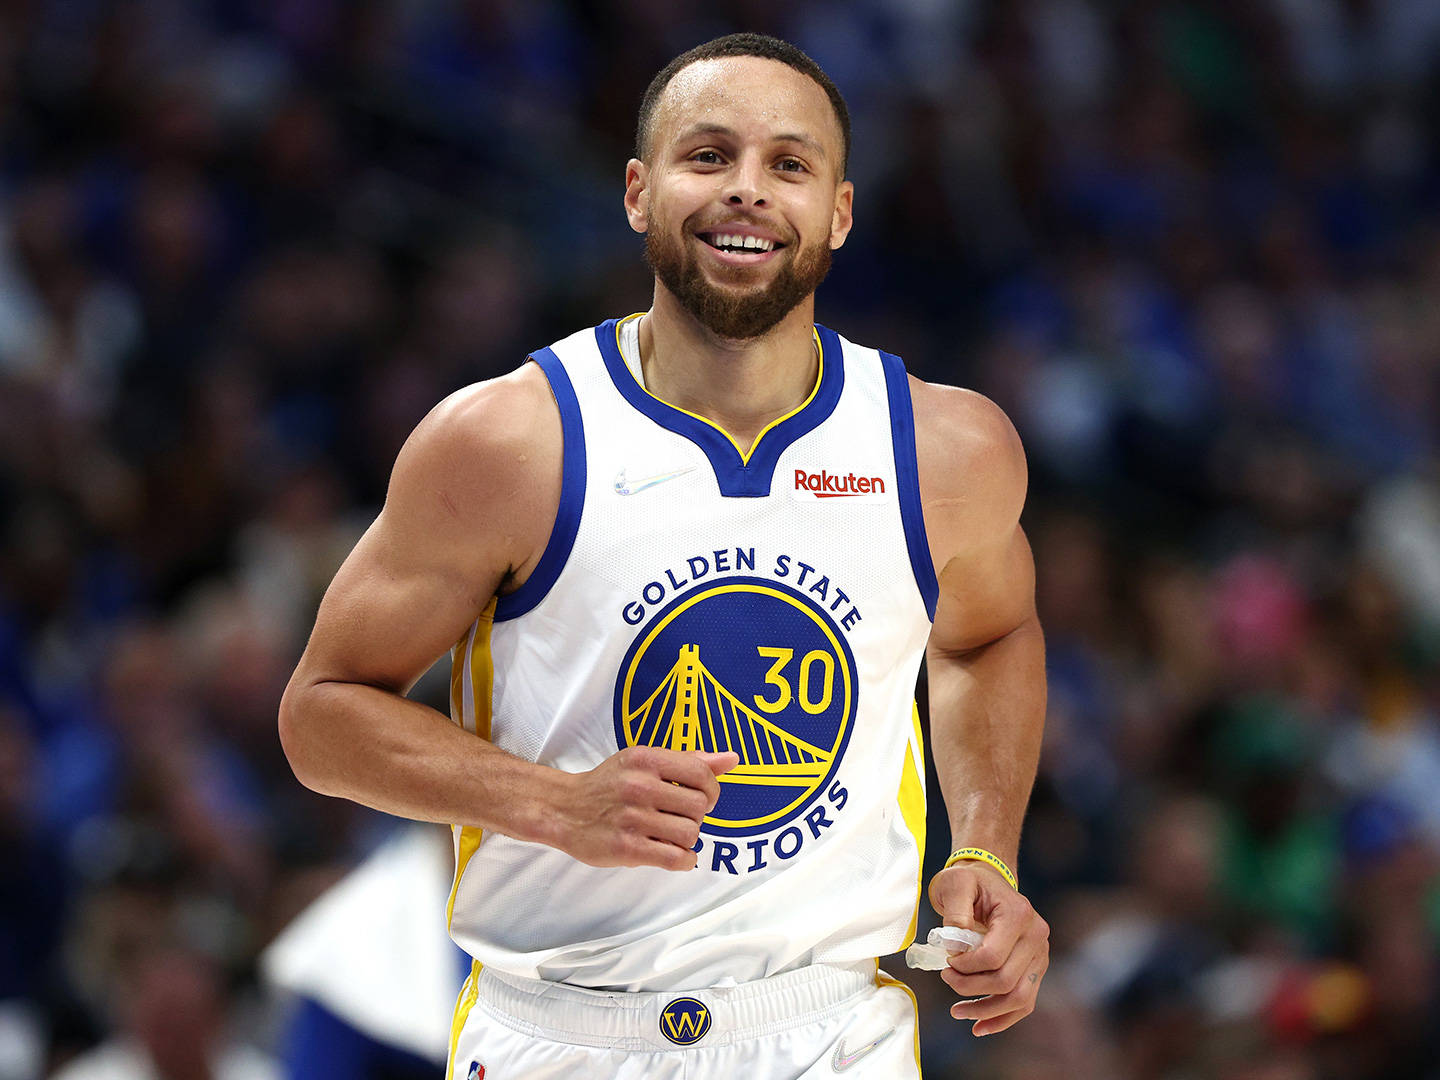 Steph Curry Bulked Up While Smiling